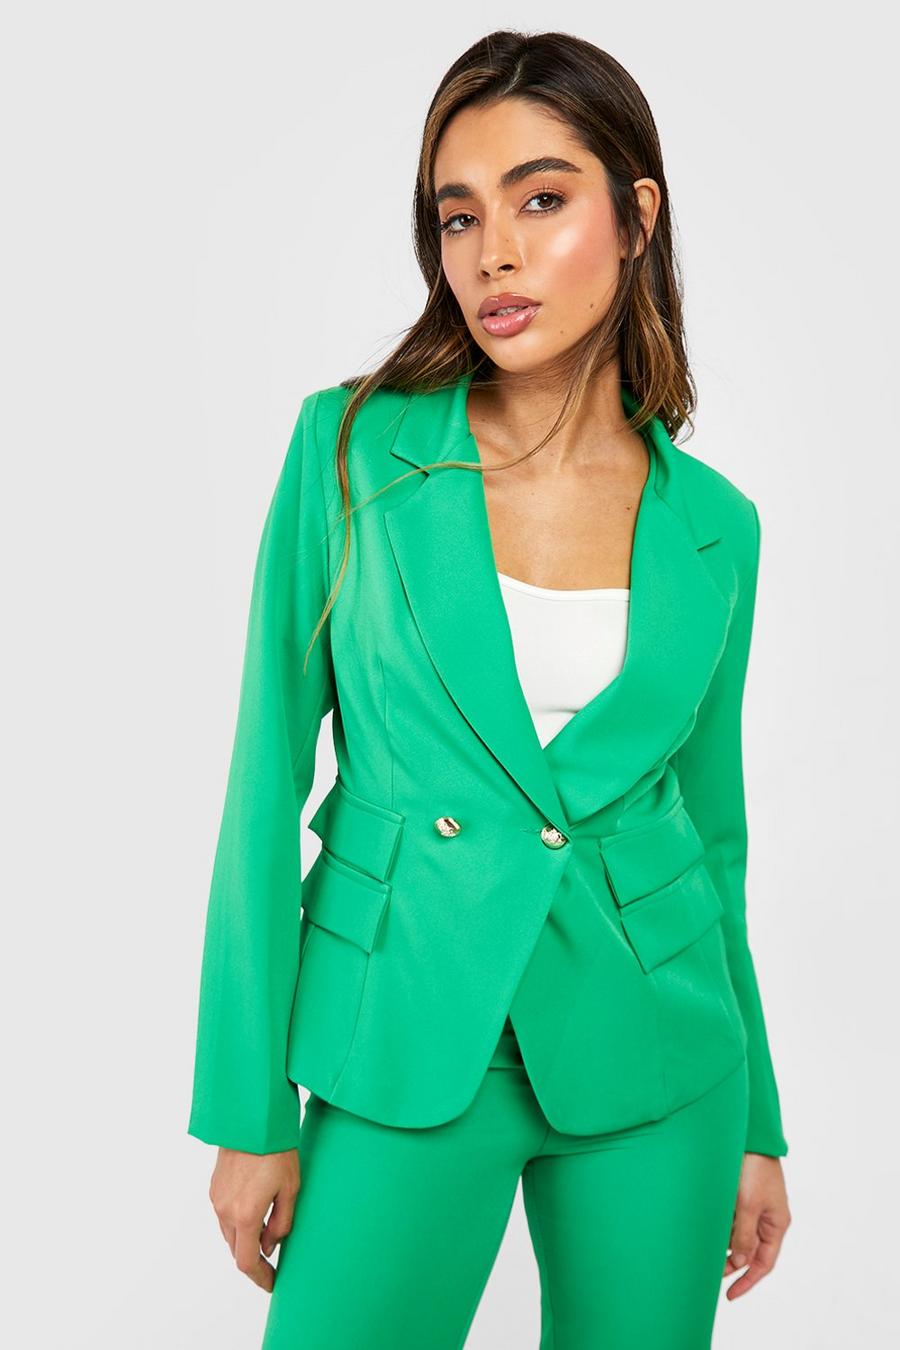 Apple green Double Pocket Detail Fitted Tailored Blazer